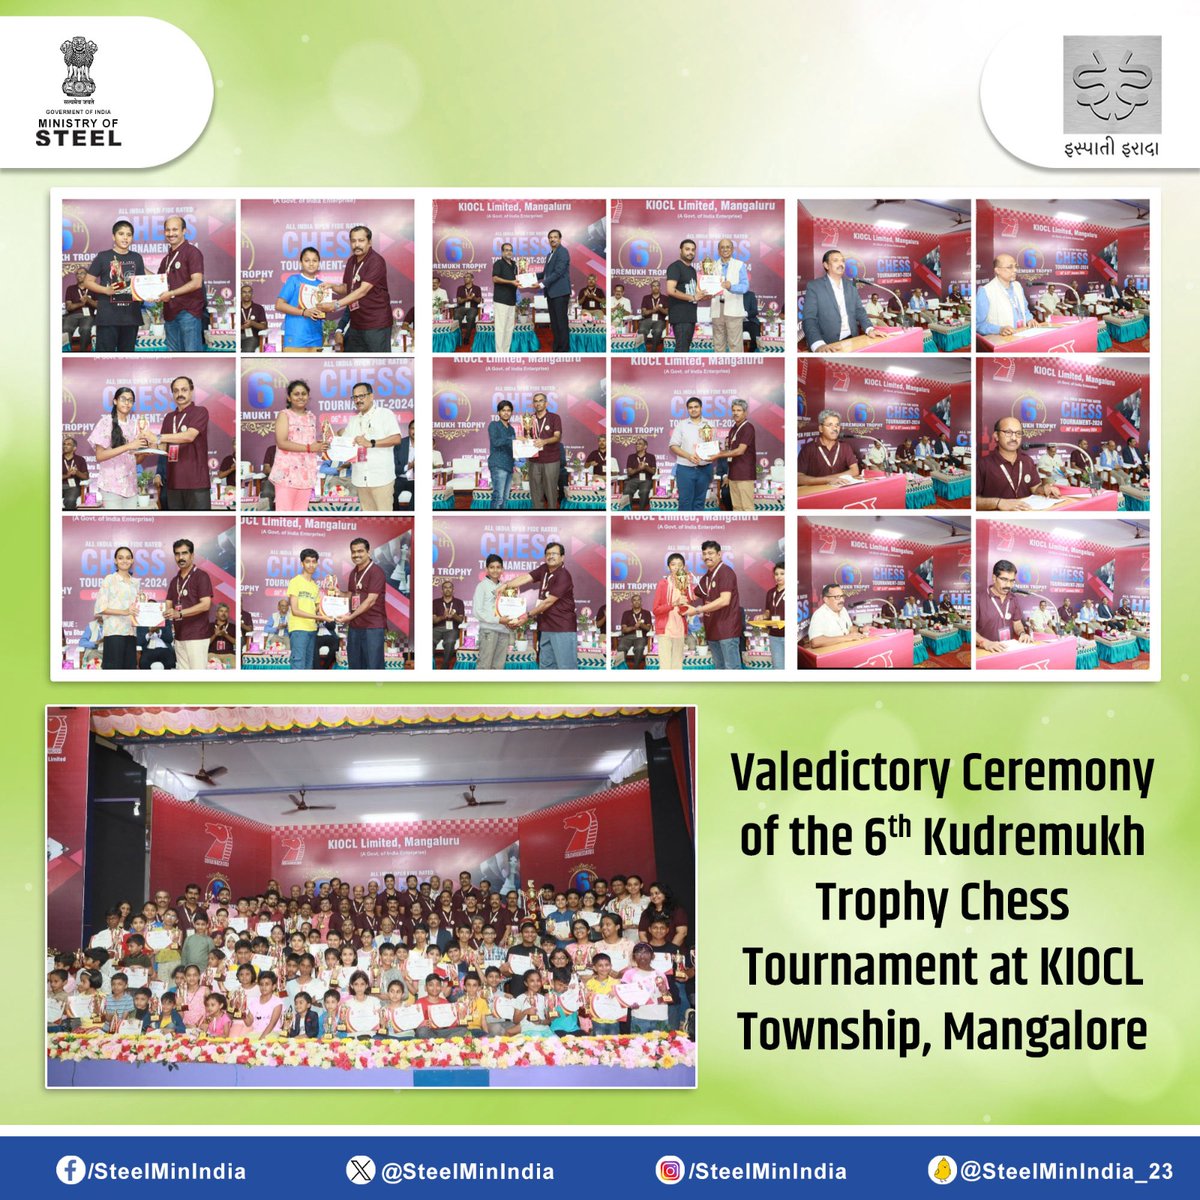 At the #ValedictoryCeremony of the All India Open Fide Rated Rapid Chess Tournament, 6th Kudremukh Trophy, at #KIOCL Township, #Mangalore prizes worth Rs.3 lakh & 185 trophies were distributed among 376 participants from across India.🏆

#ChessChampions #KudremukhTrophy